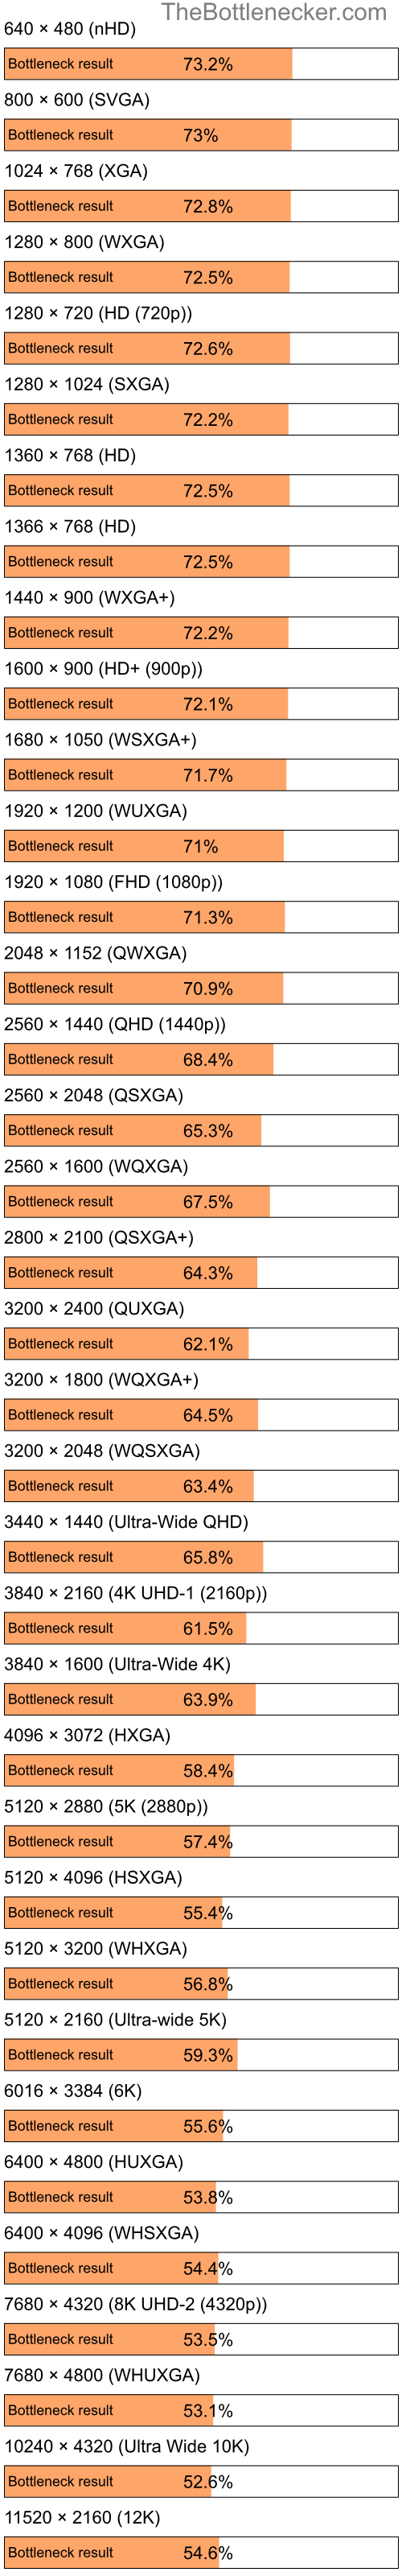 Bottleneck results by resolution for AMD Athlon II X4 615e and AMD Radeon RX 6800 in General Tasks